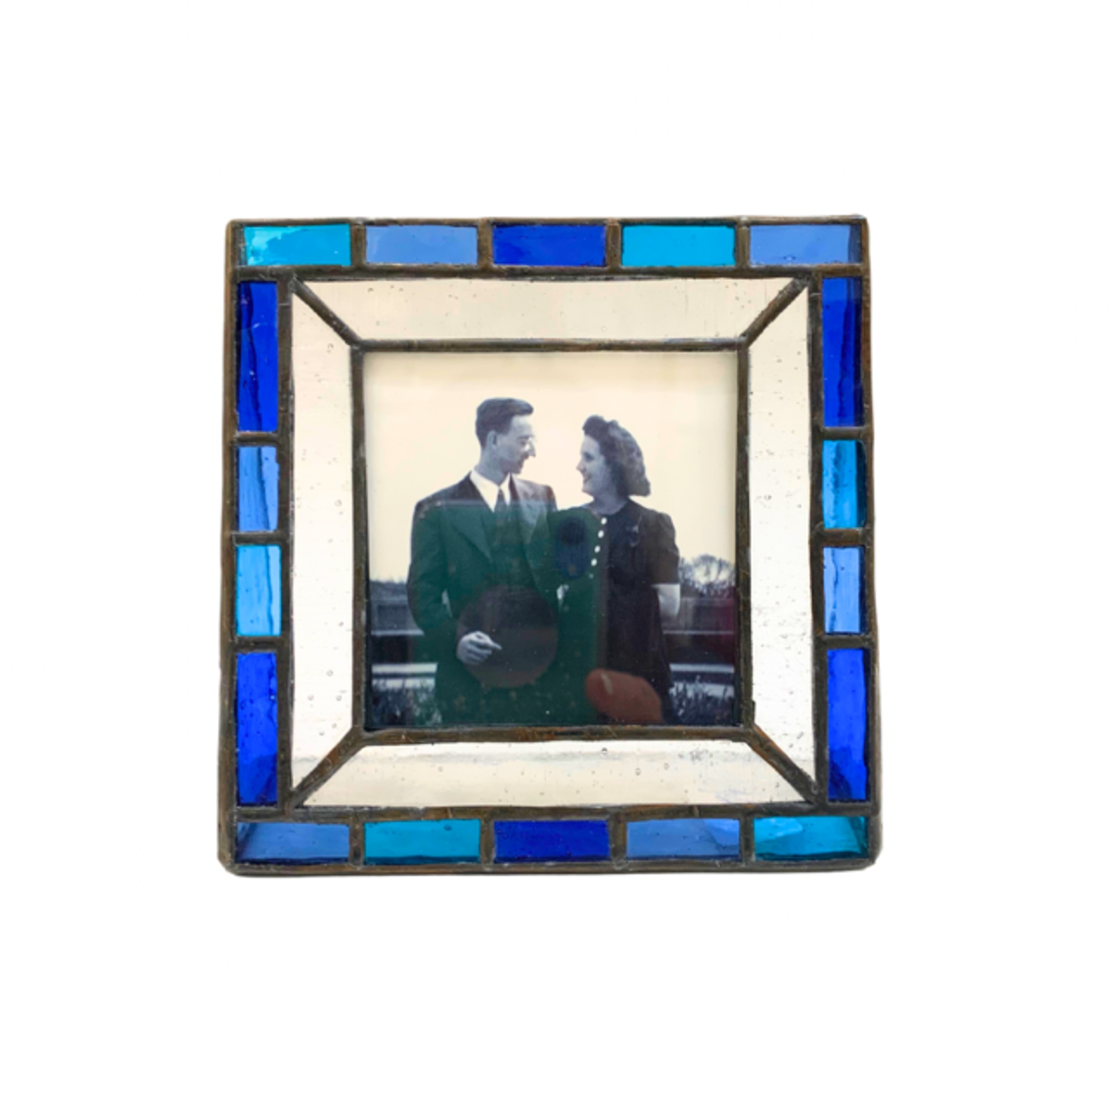 Tones of Blue Stained Glass Frame